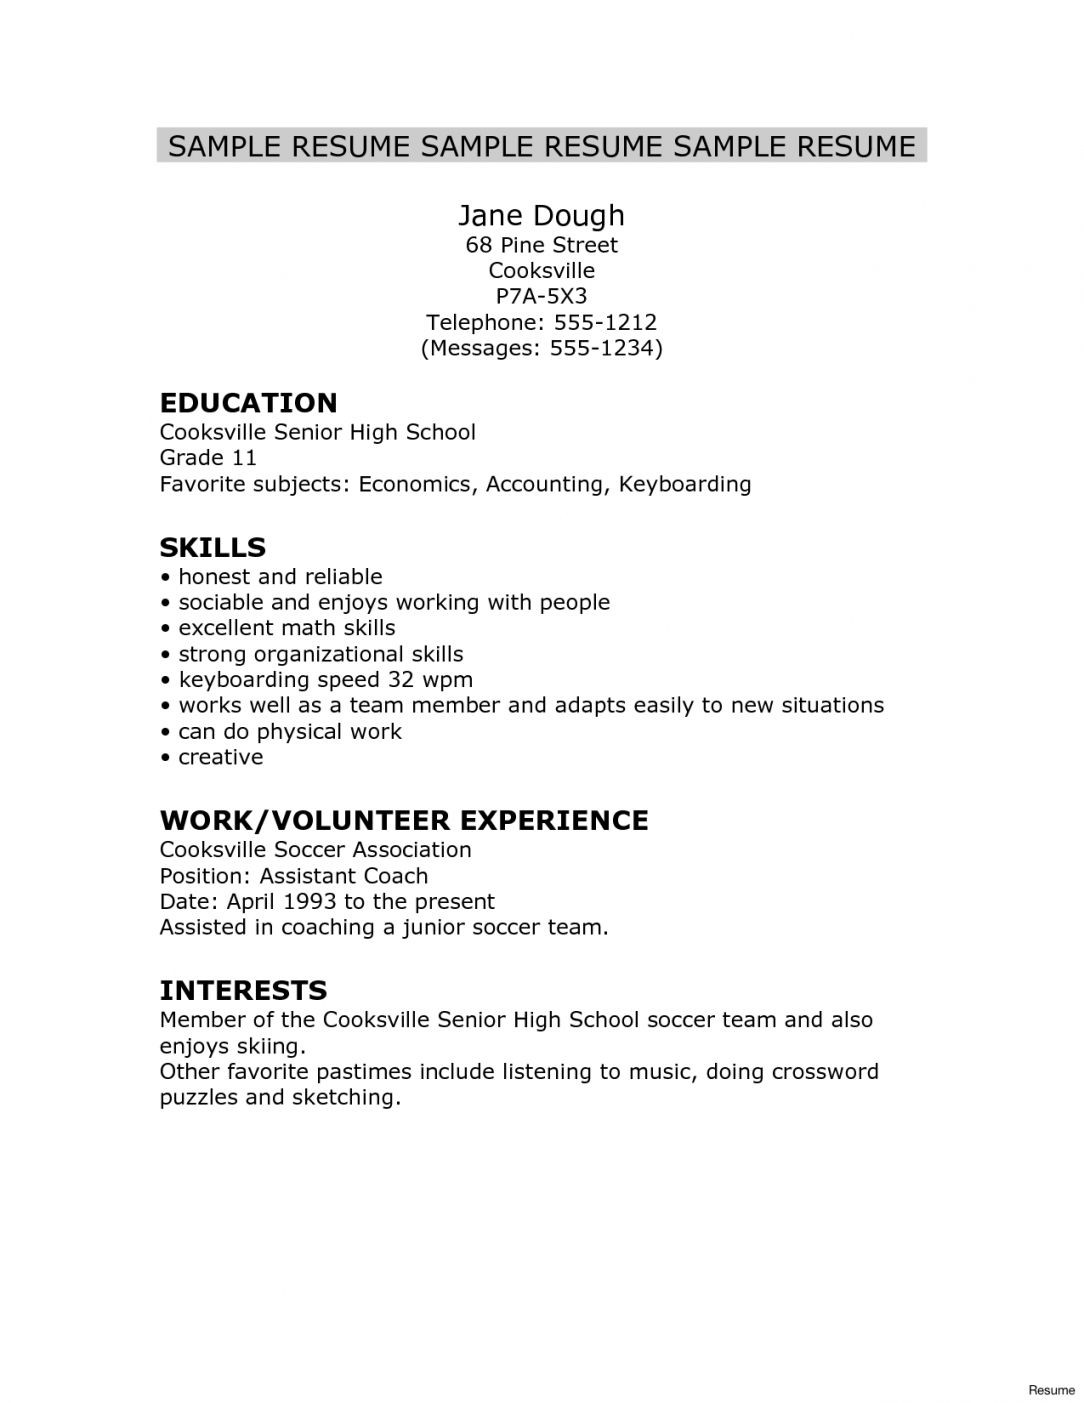 Resume Sample for High School Graduate with No Work Experience Resume format High School Graduate – Resume format High School …